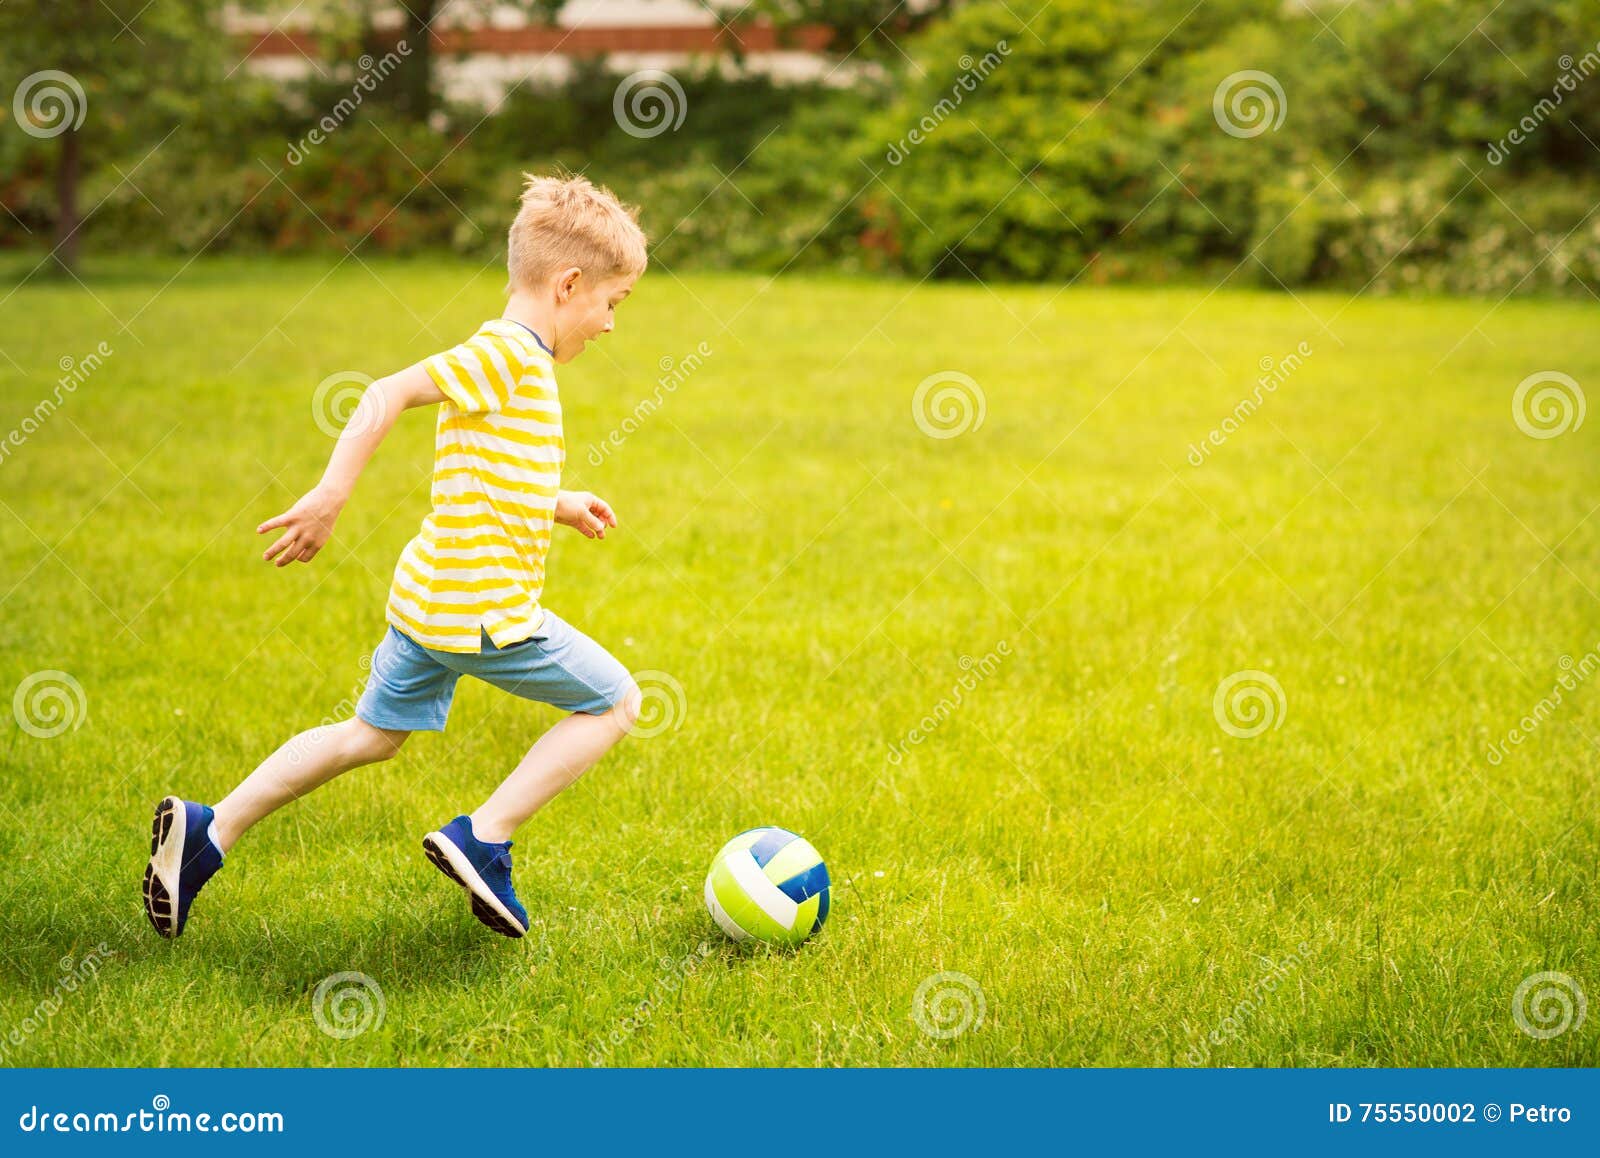 sporting boy plays football in sunny park